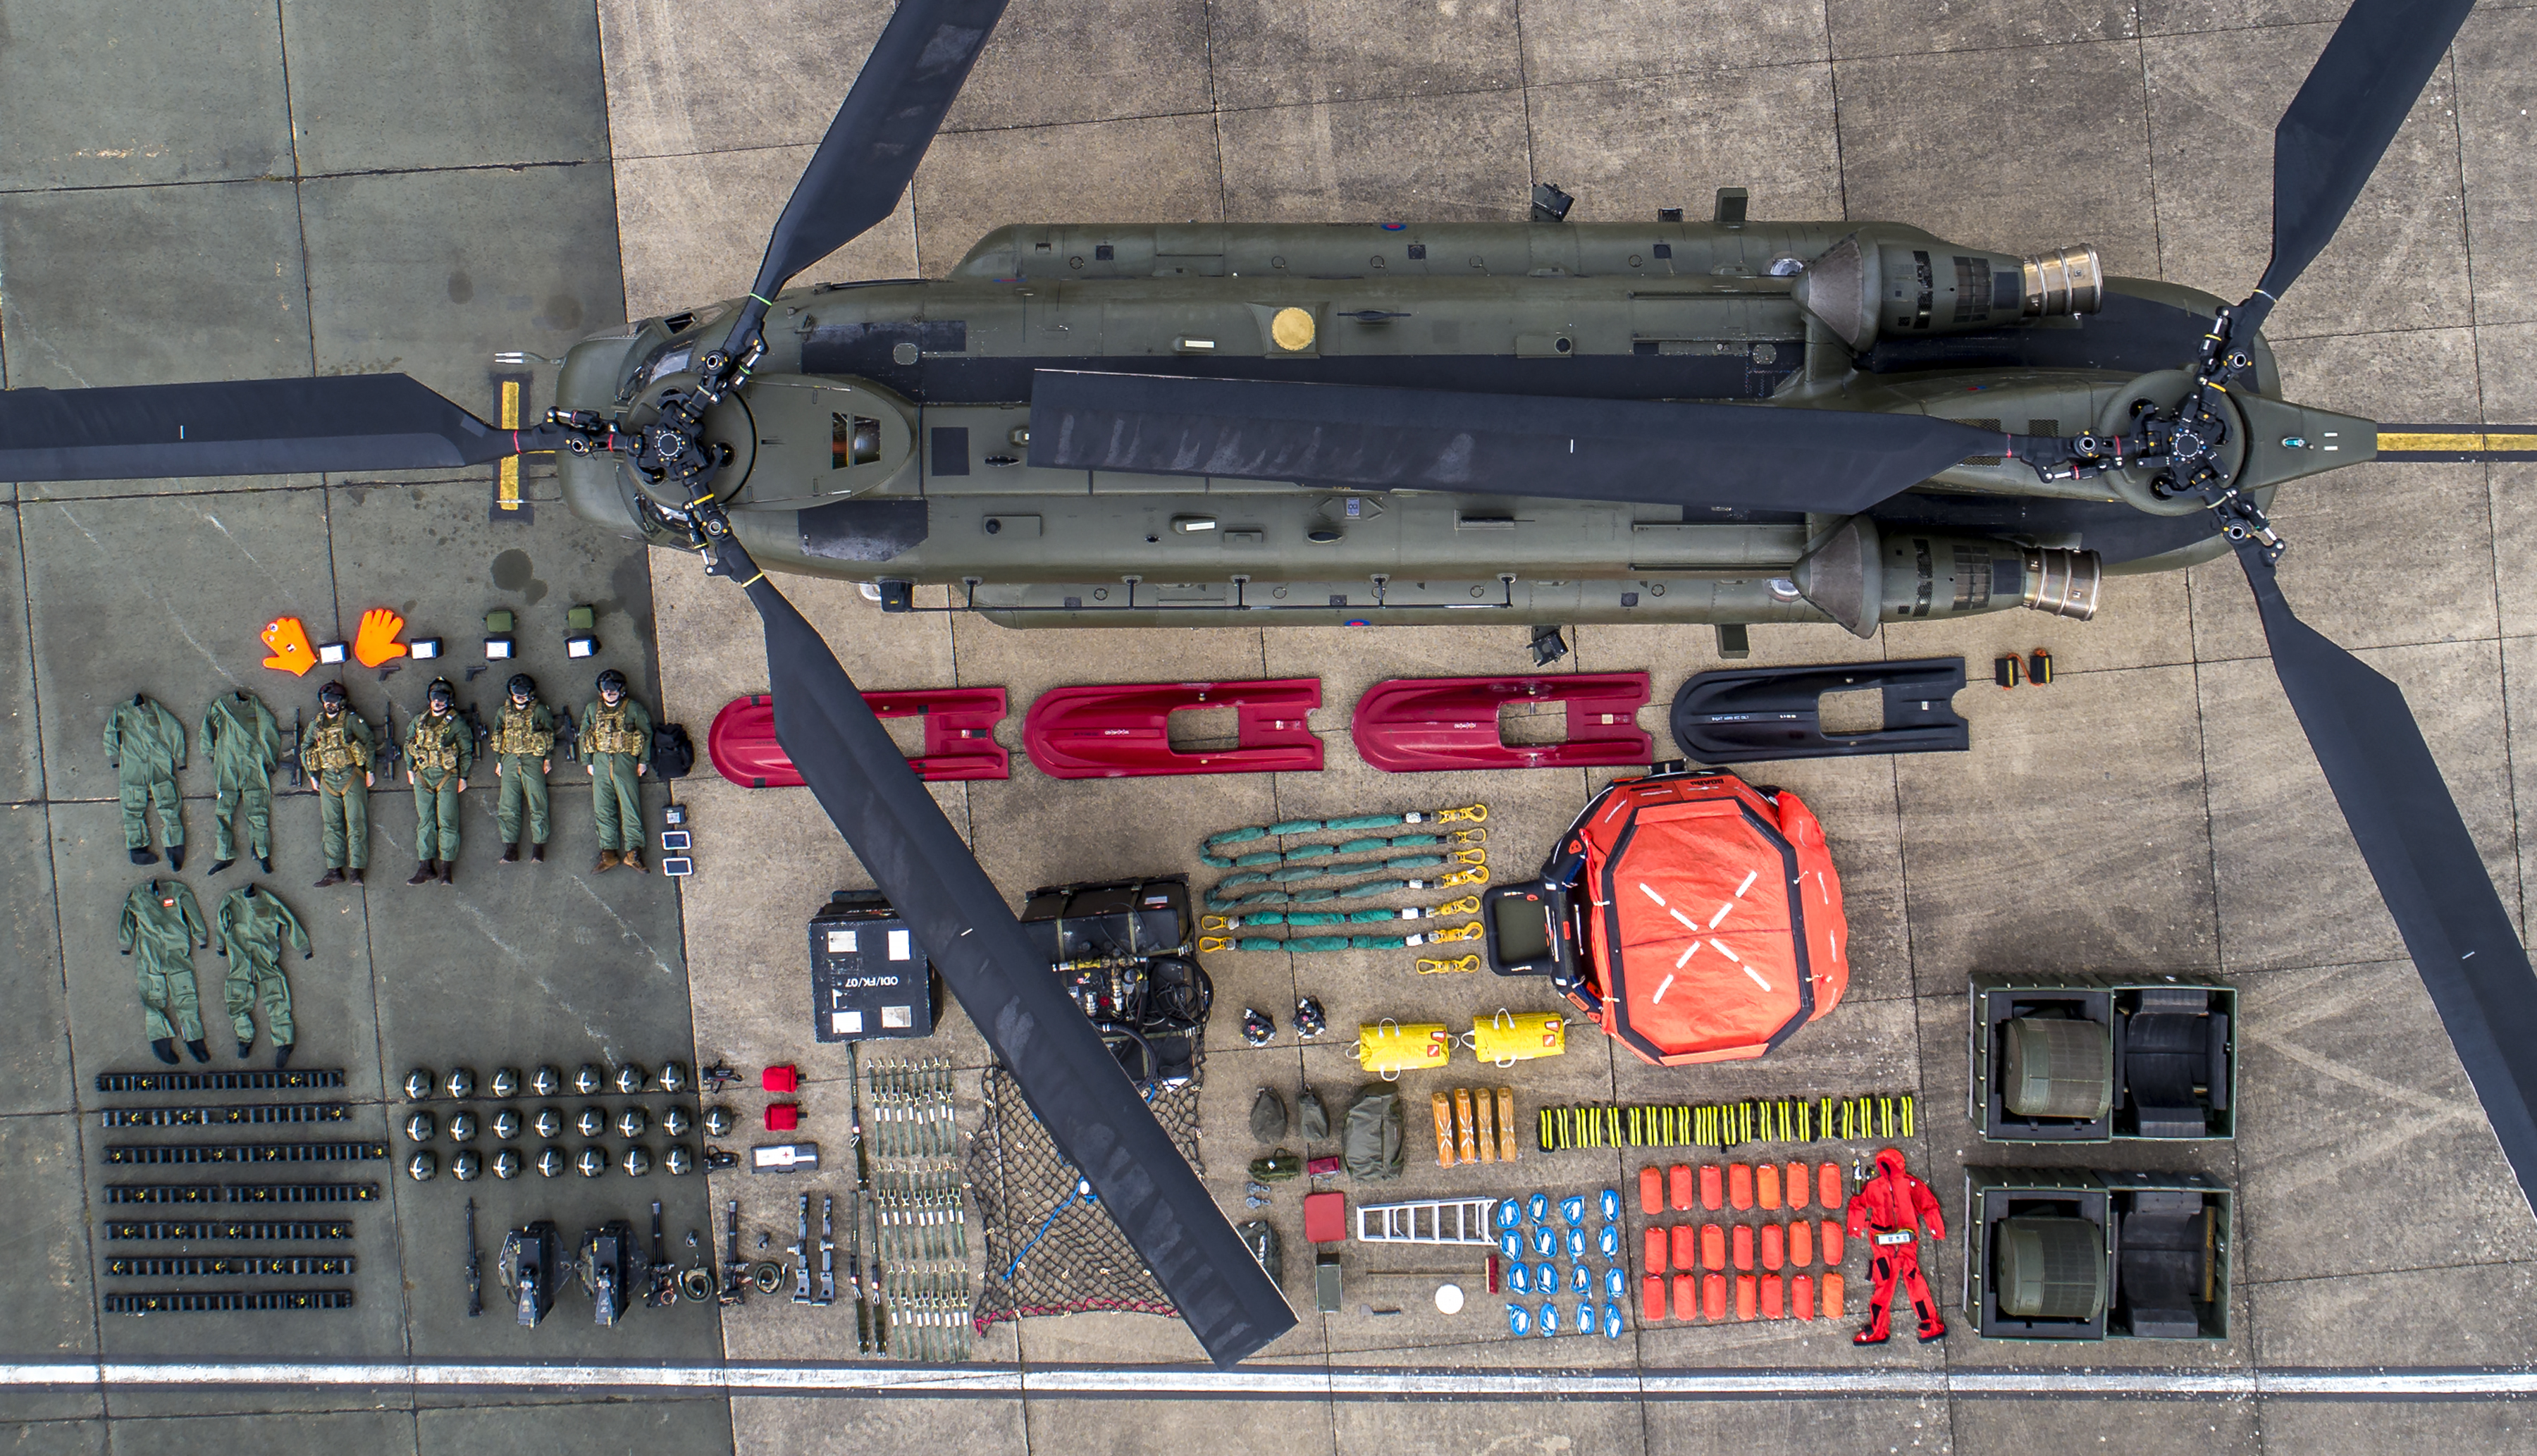 View of the chinook and all the onboard kit, laid out on the ground, taken from above.